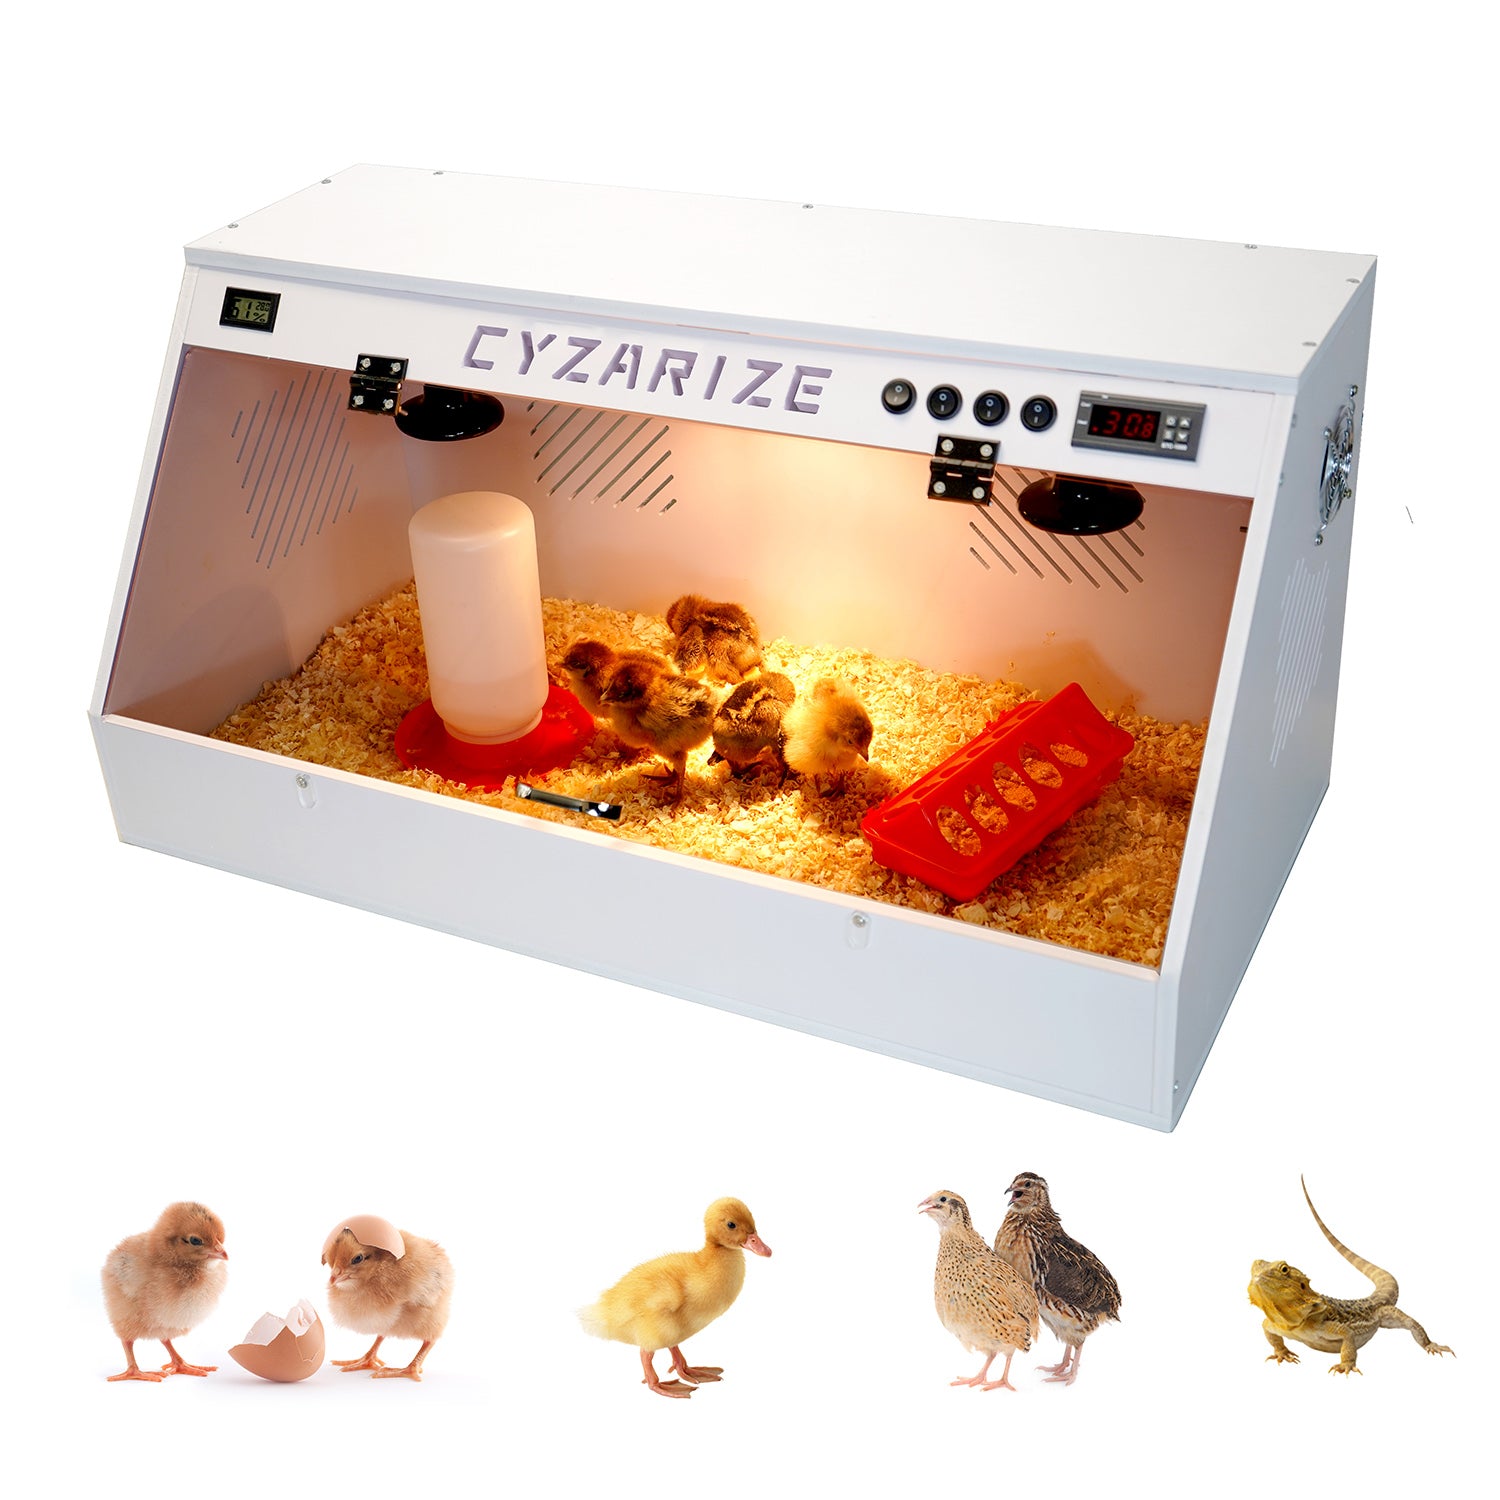 Cyzarize comes with two ceramic heat lamps and lights. has a smart thermostat and an exhaust fan Smart chick brooder for 45 chicks/ducks/quails